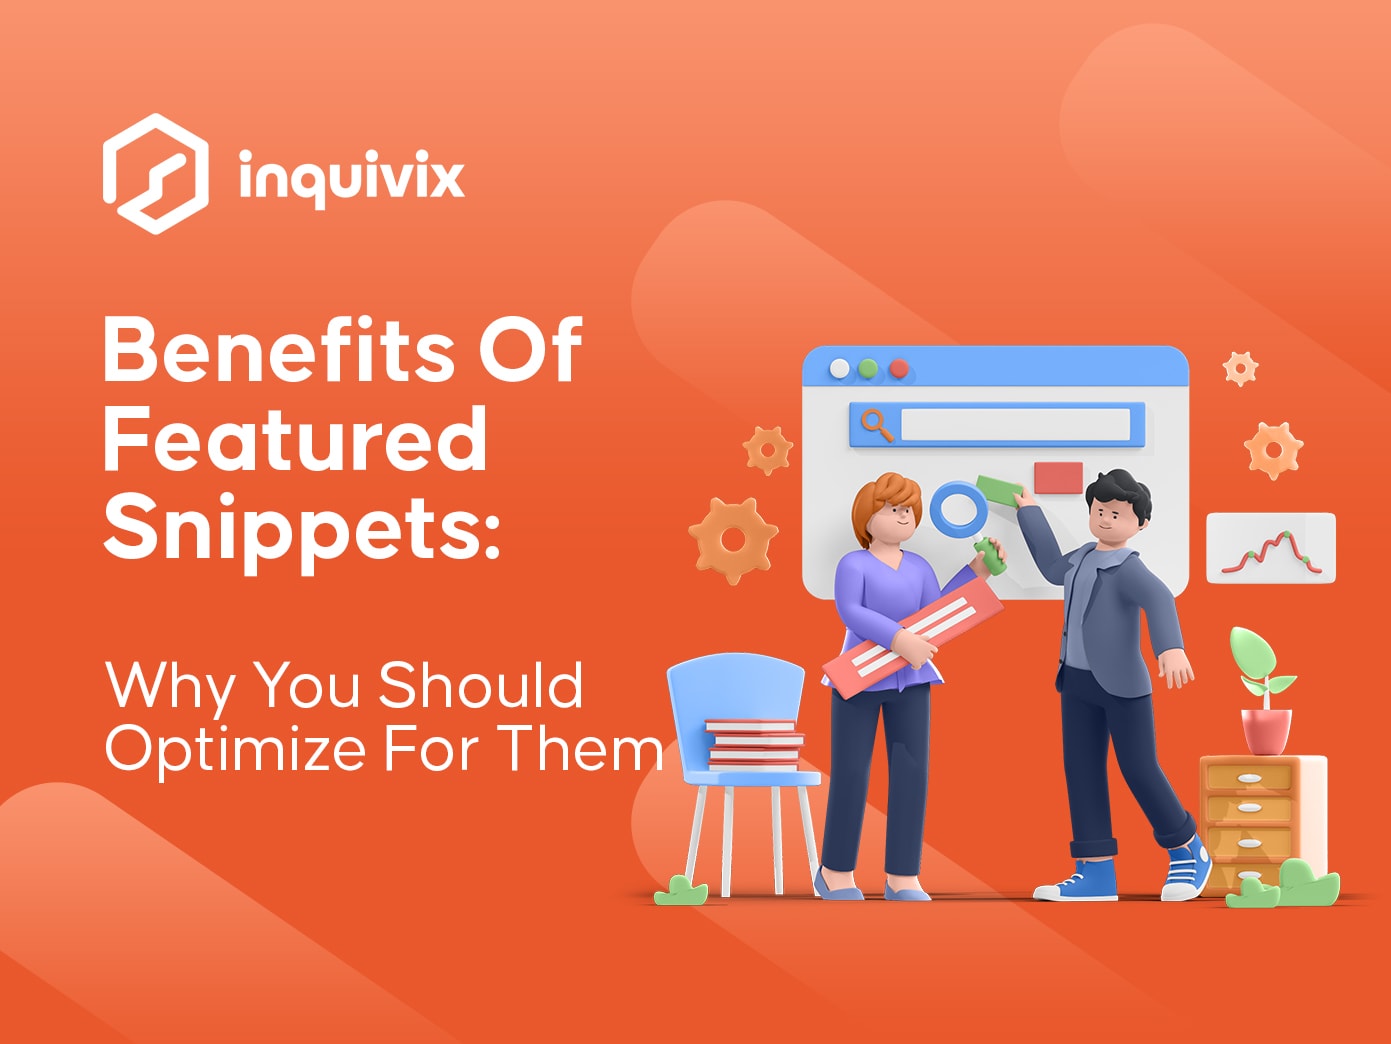 Benefits Of Featured Snippets: Why You Should Optimize For Them